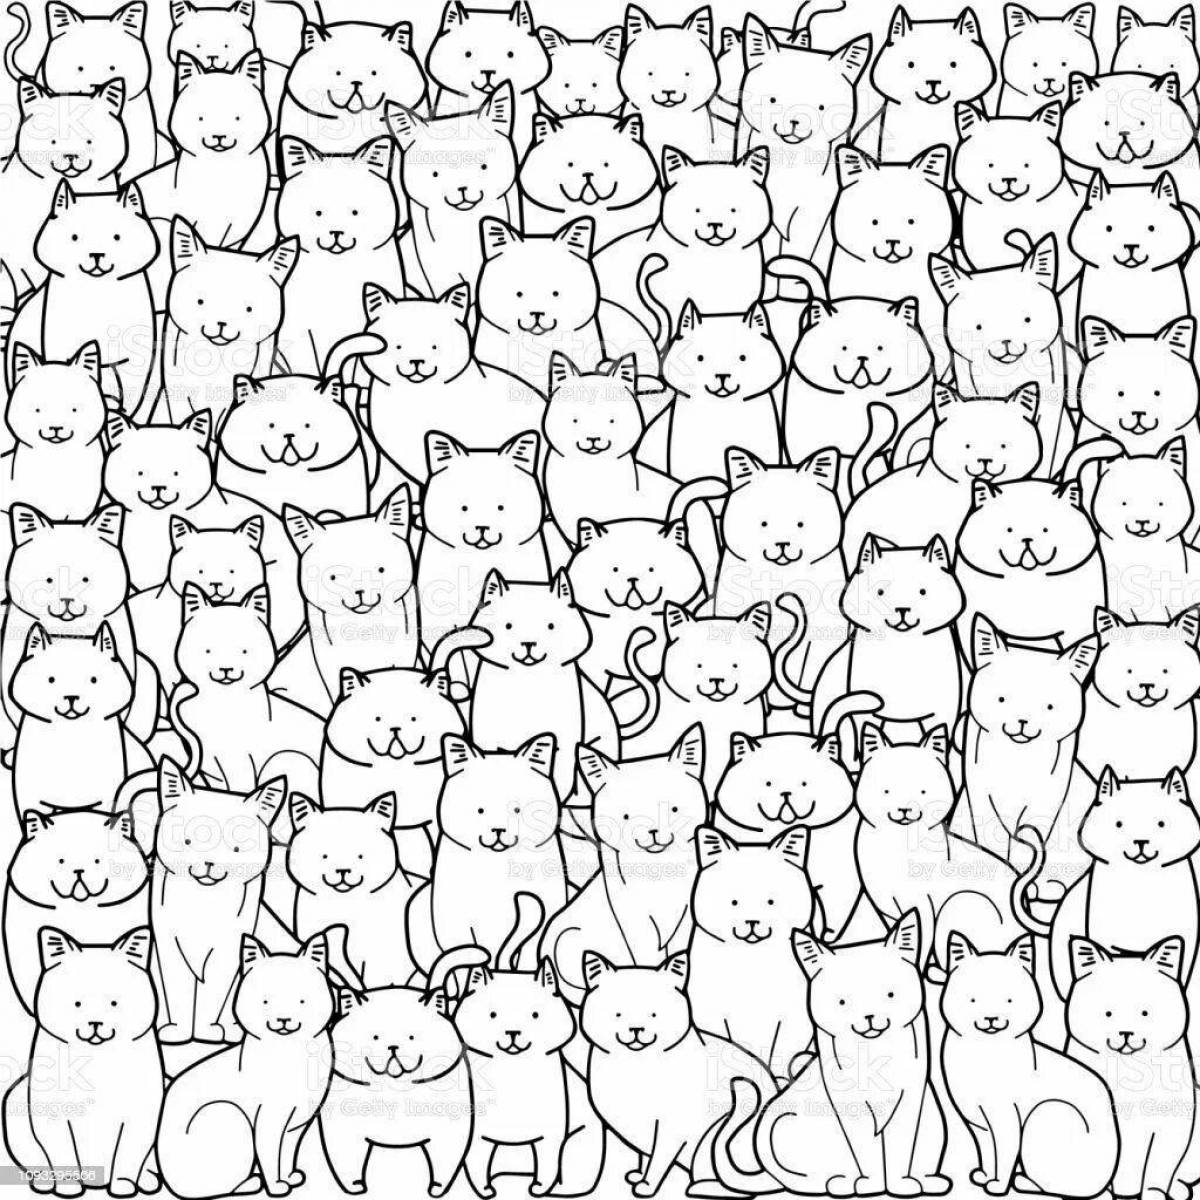 Fun many cats on one page